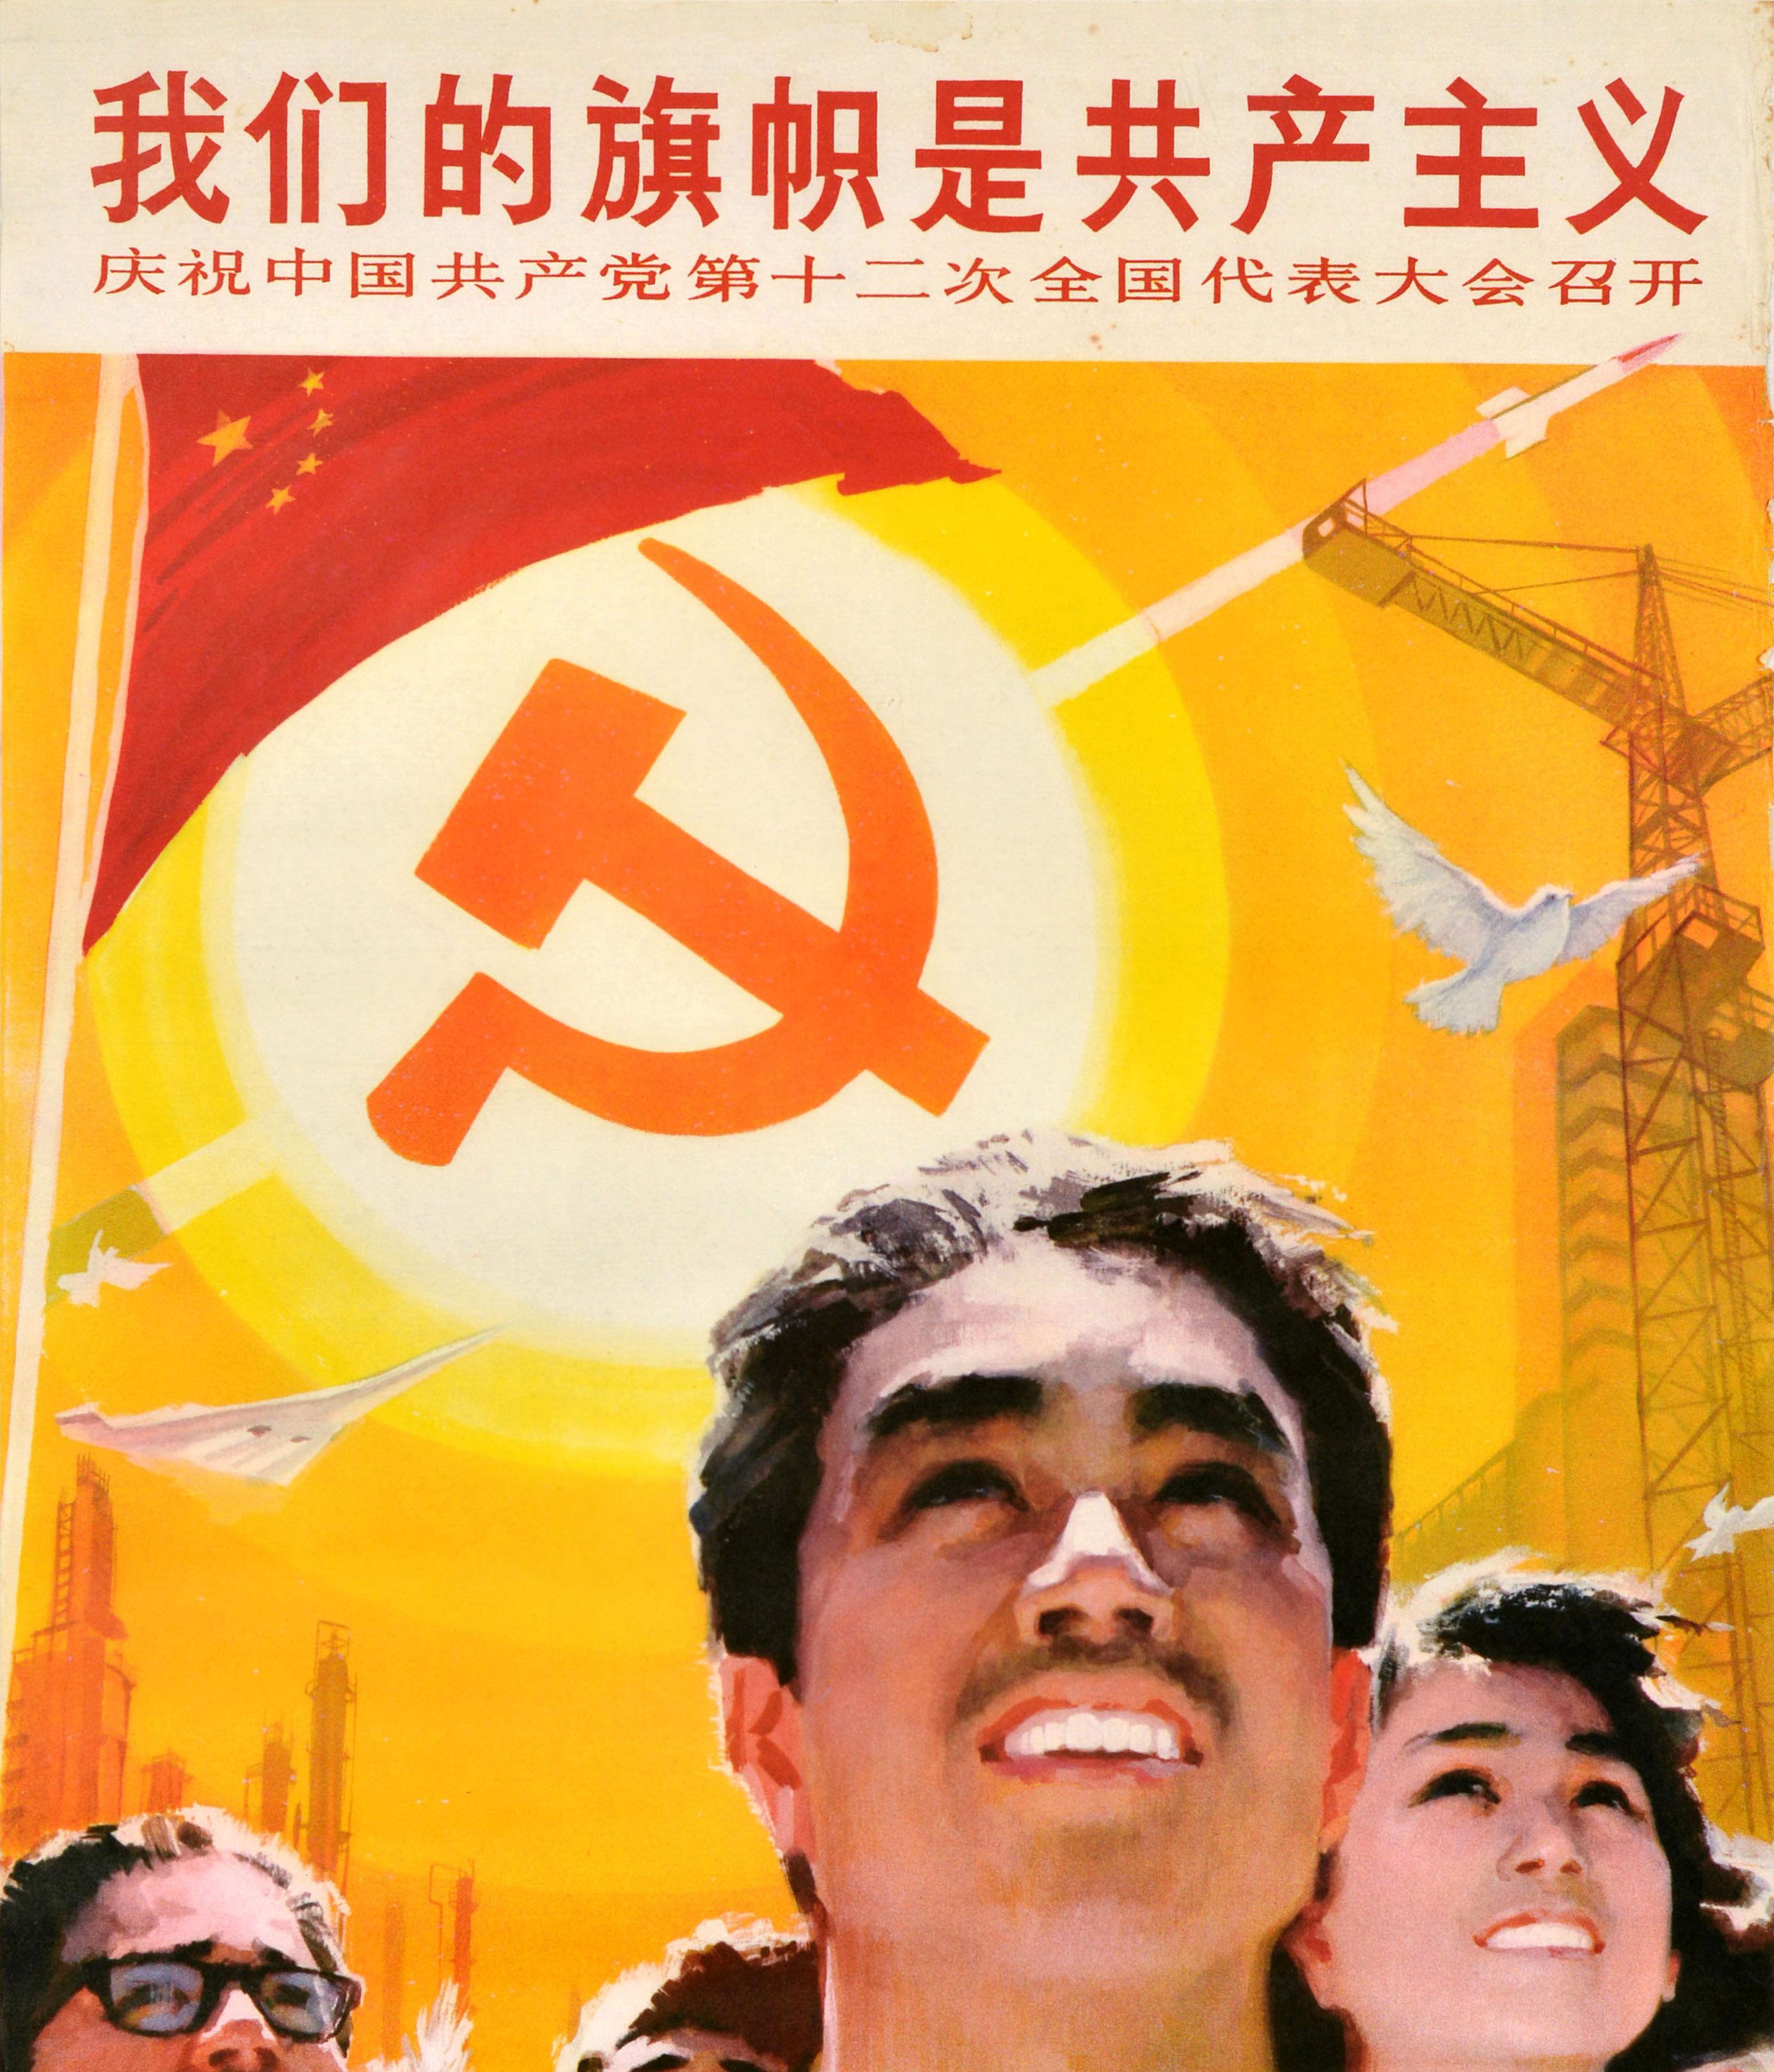 Original vintage Chinese Communist Party propaganda poster - Our flag is communism Celebrate the convening of the 12th National Congress of the Communist Party of China / 我们的旗帜是共产主义。庆祝中国共产党第十二次全国代表大会召开 - featuring an illustration of smiling young